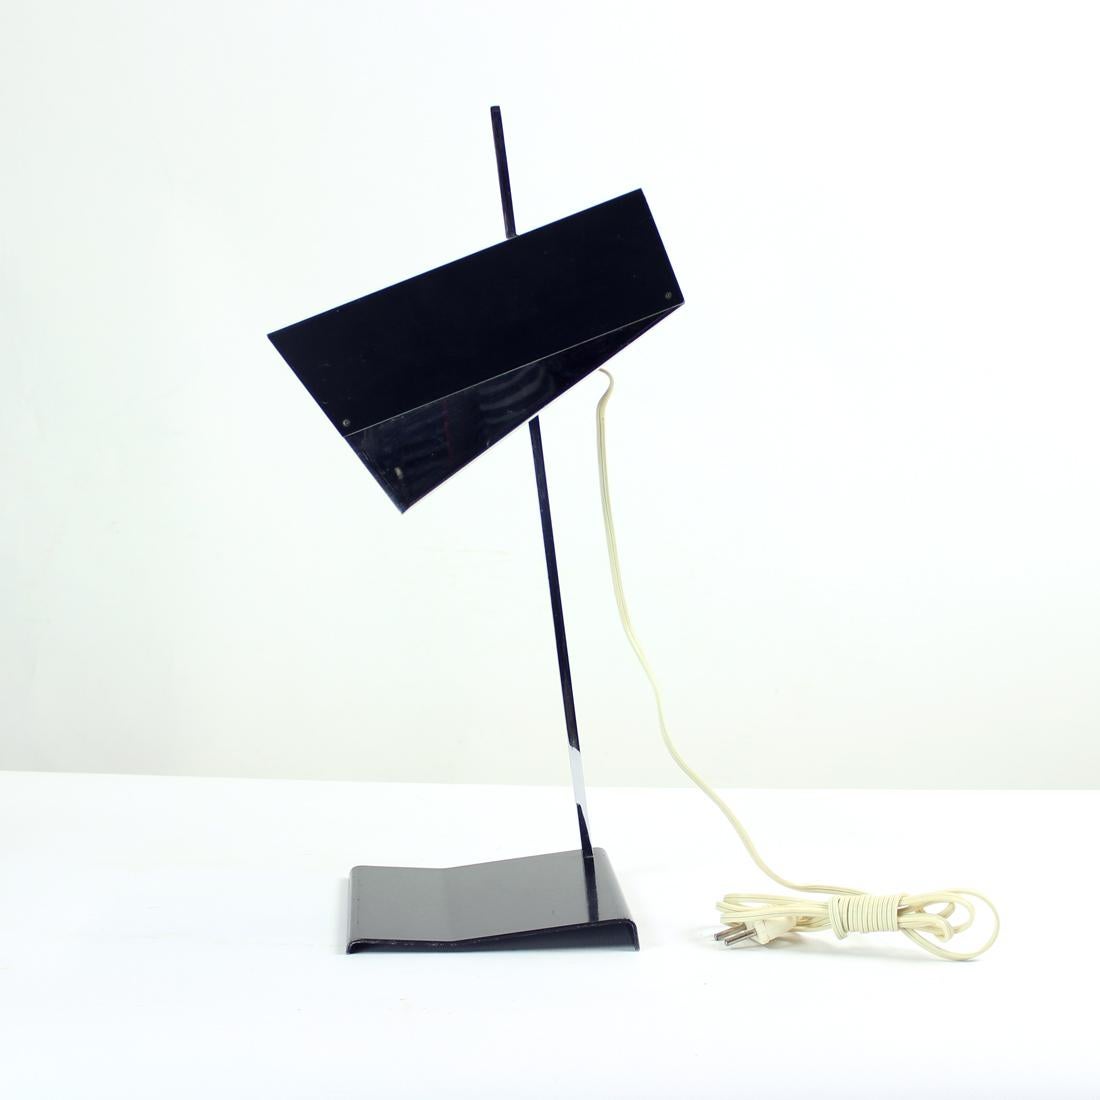 Iconic table lamp produced in 1960s by Napako company, designed by Josef Hurka. The lamp is a strong design feature. The base and construction is made out of black metal with chrome details on the shield and construction. Beautiful condition of the